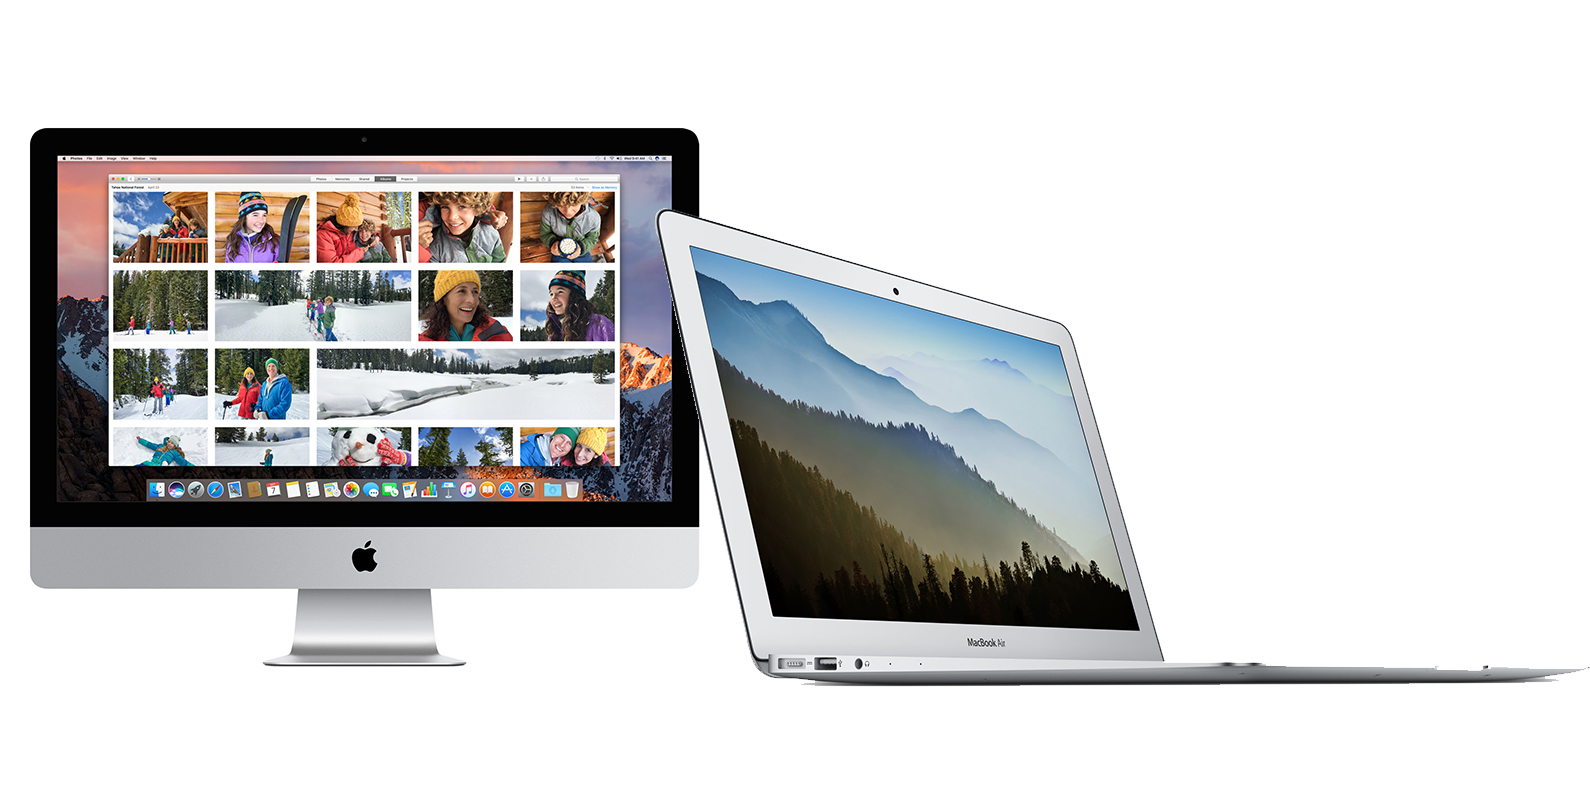 eBay's Black Friday Sale brings solid Apple deals: 13-inch MacBook Air - What Macbooks Are On Sale On Black Friday